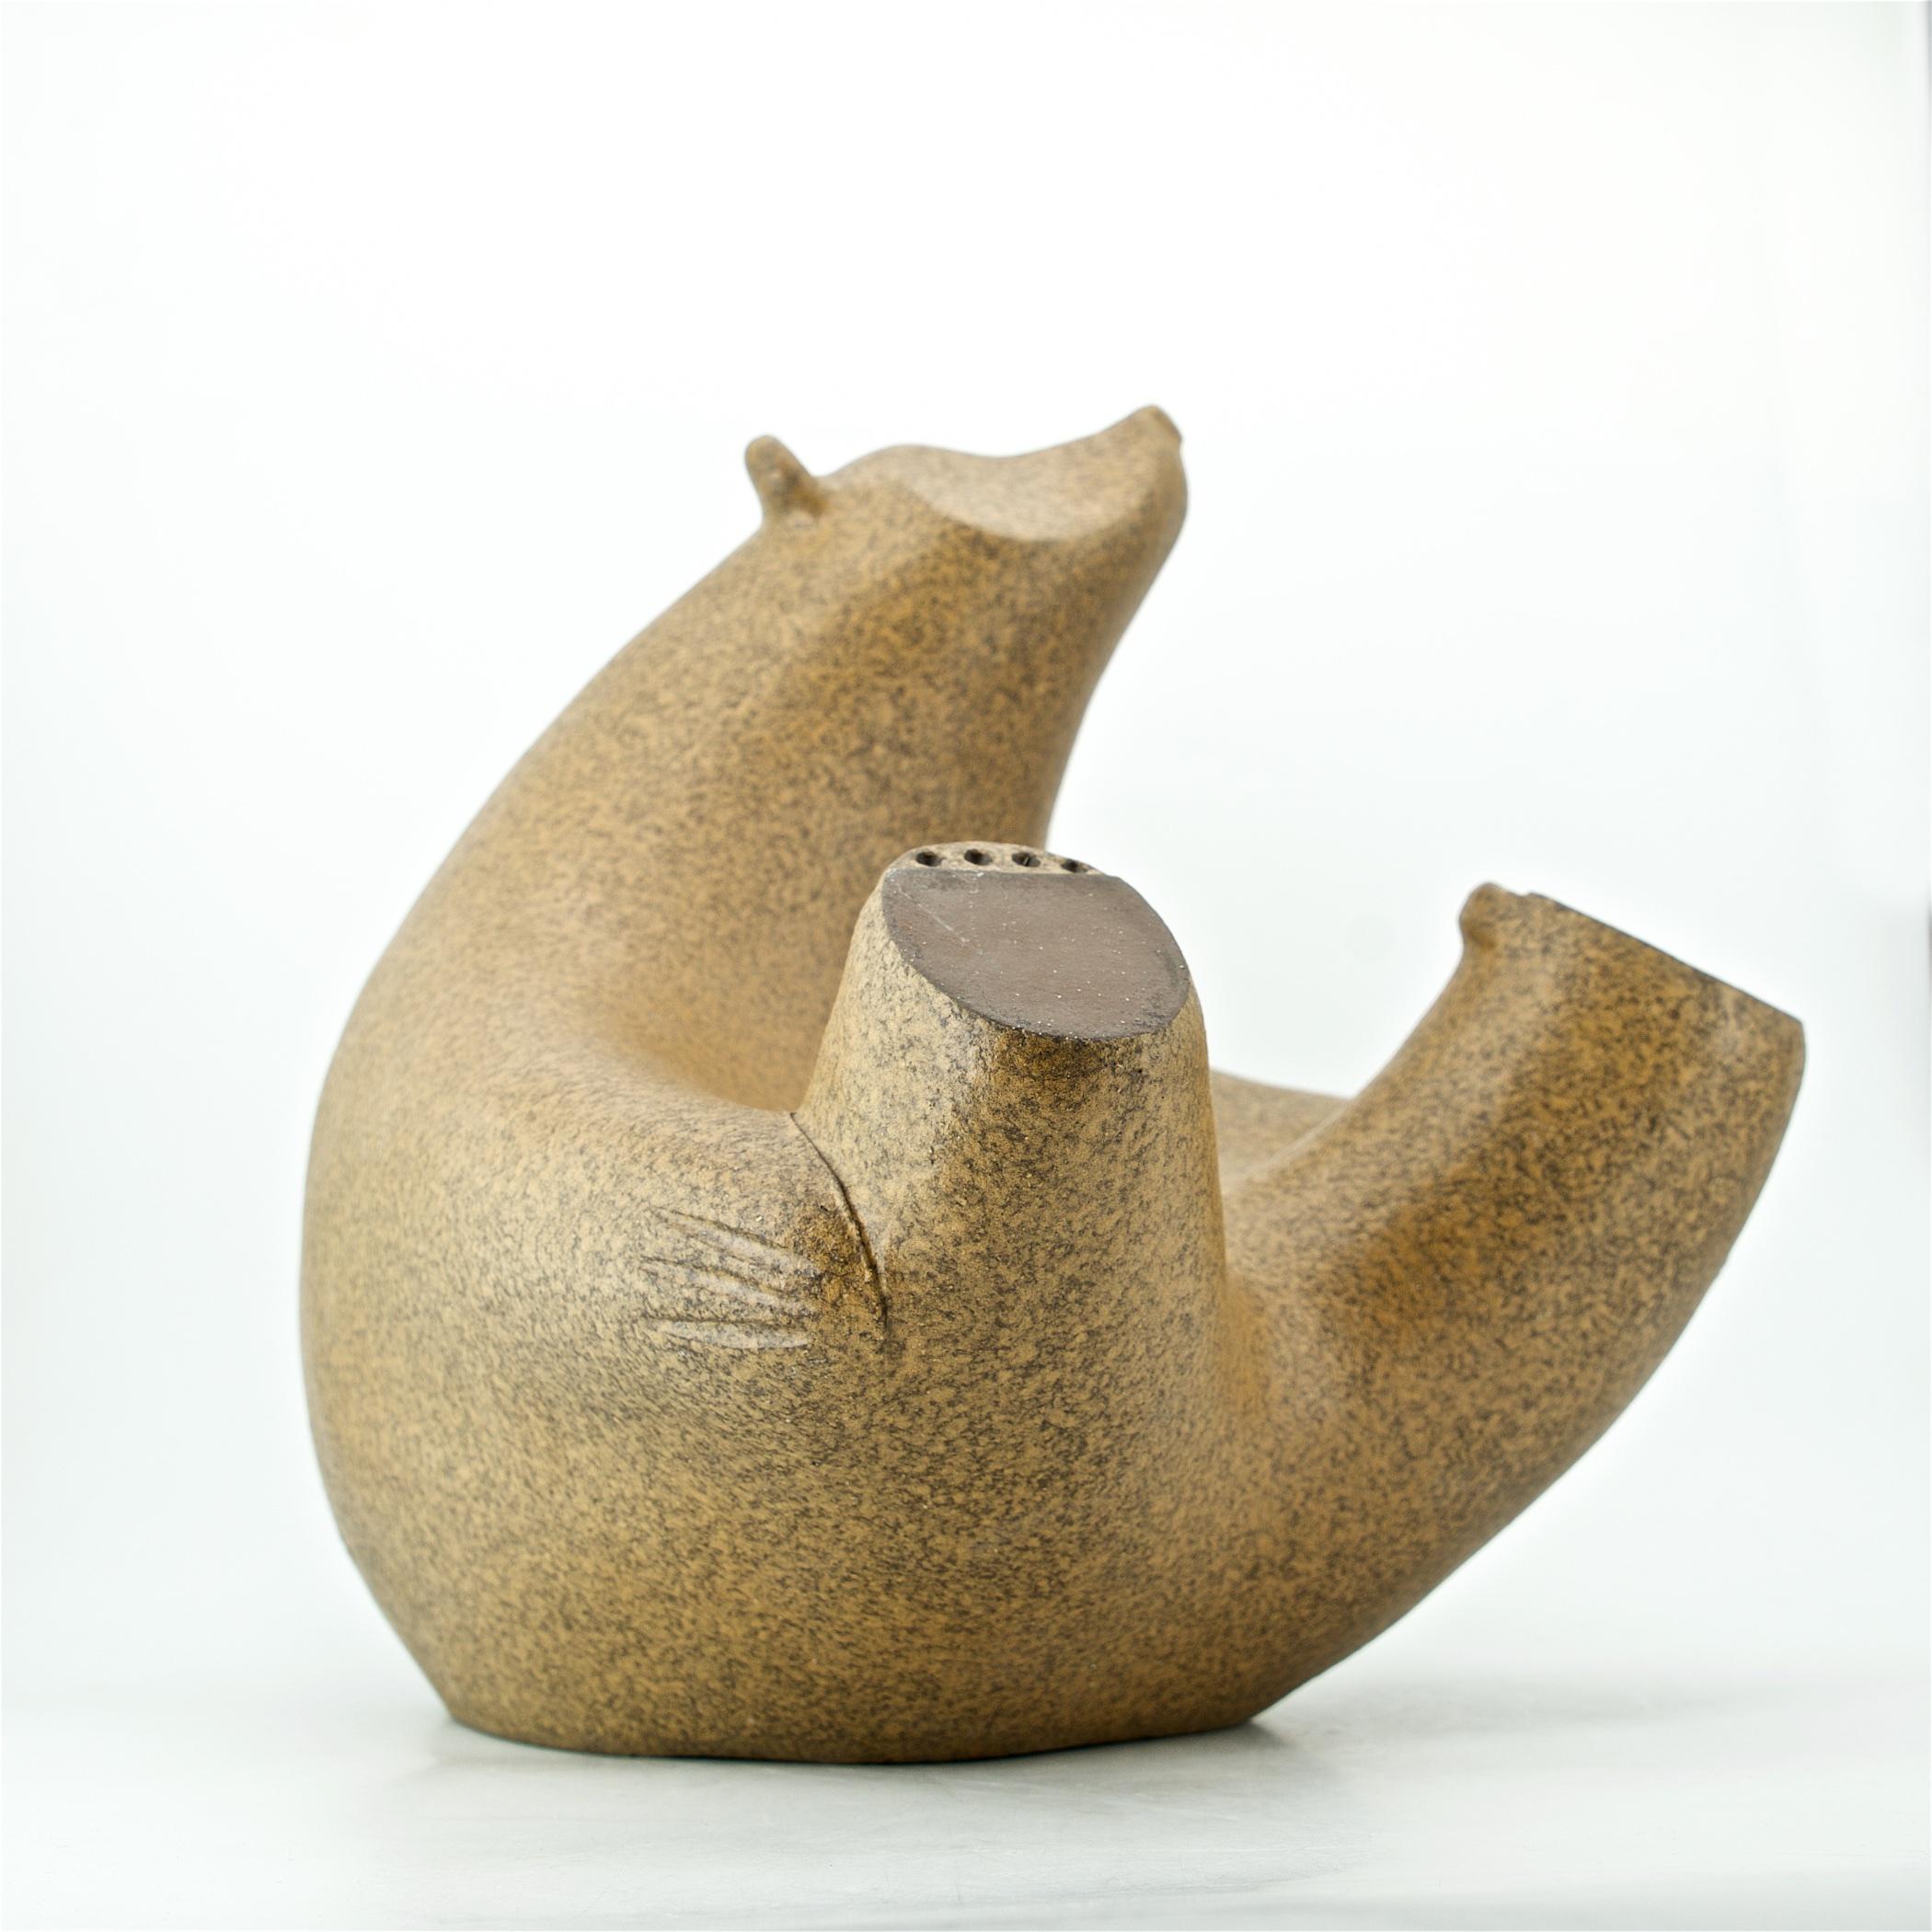 Post-Modern 1990s Postmodern Abstract Honey Bear Sculpture Large Architectural Form For Sale